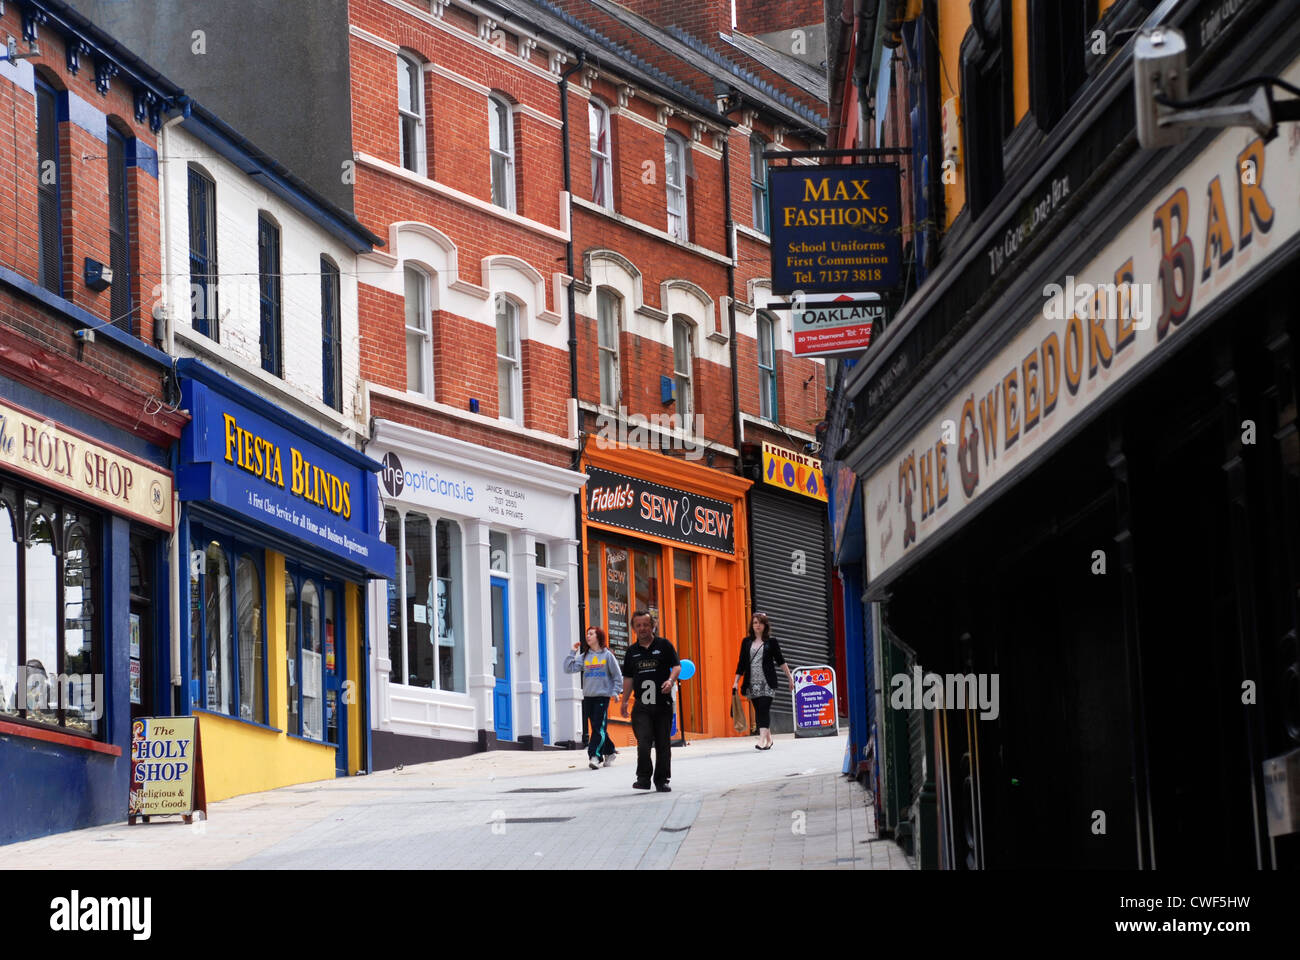 Waterloo Street, Derry, Londonderry, County Derry, Ulster, Nord Irland, UK, Europa. Stockfoto